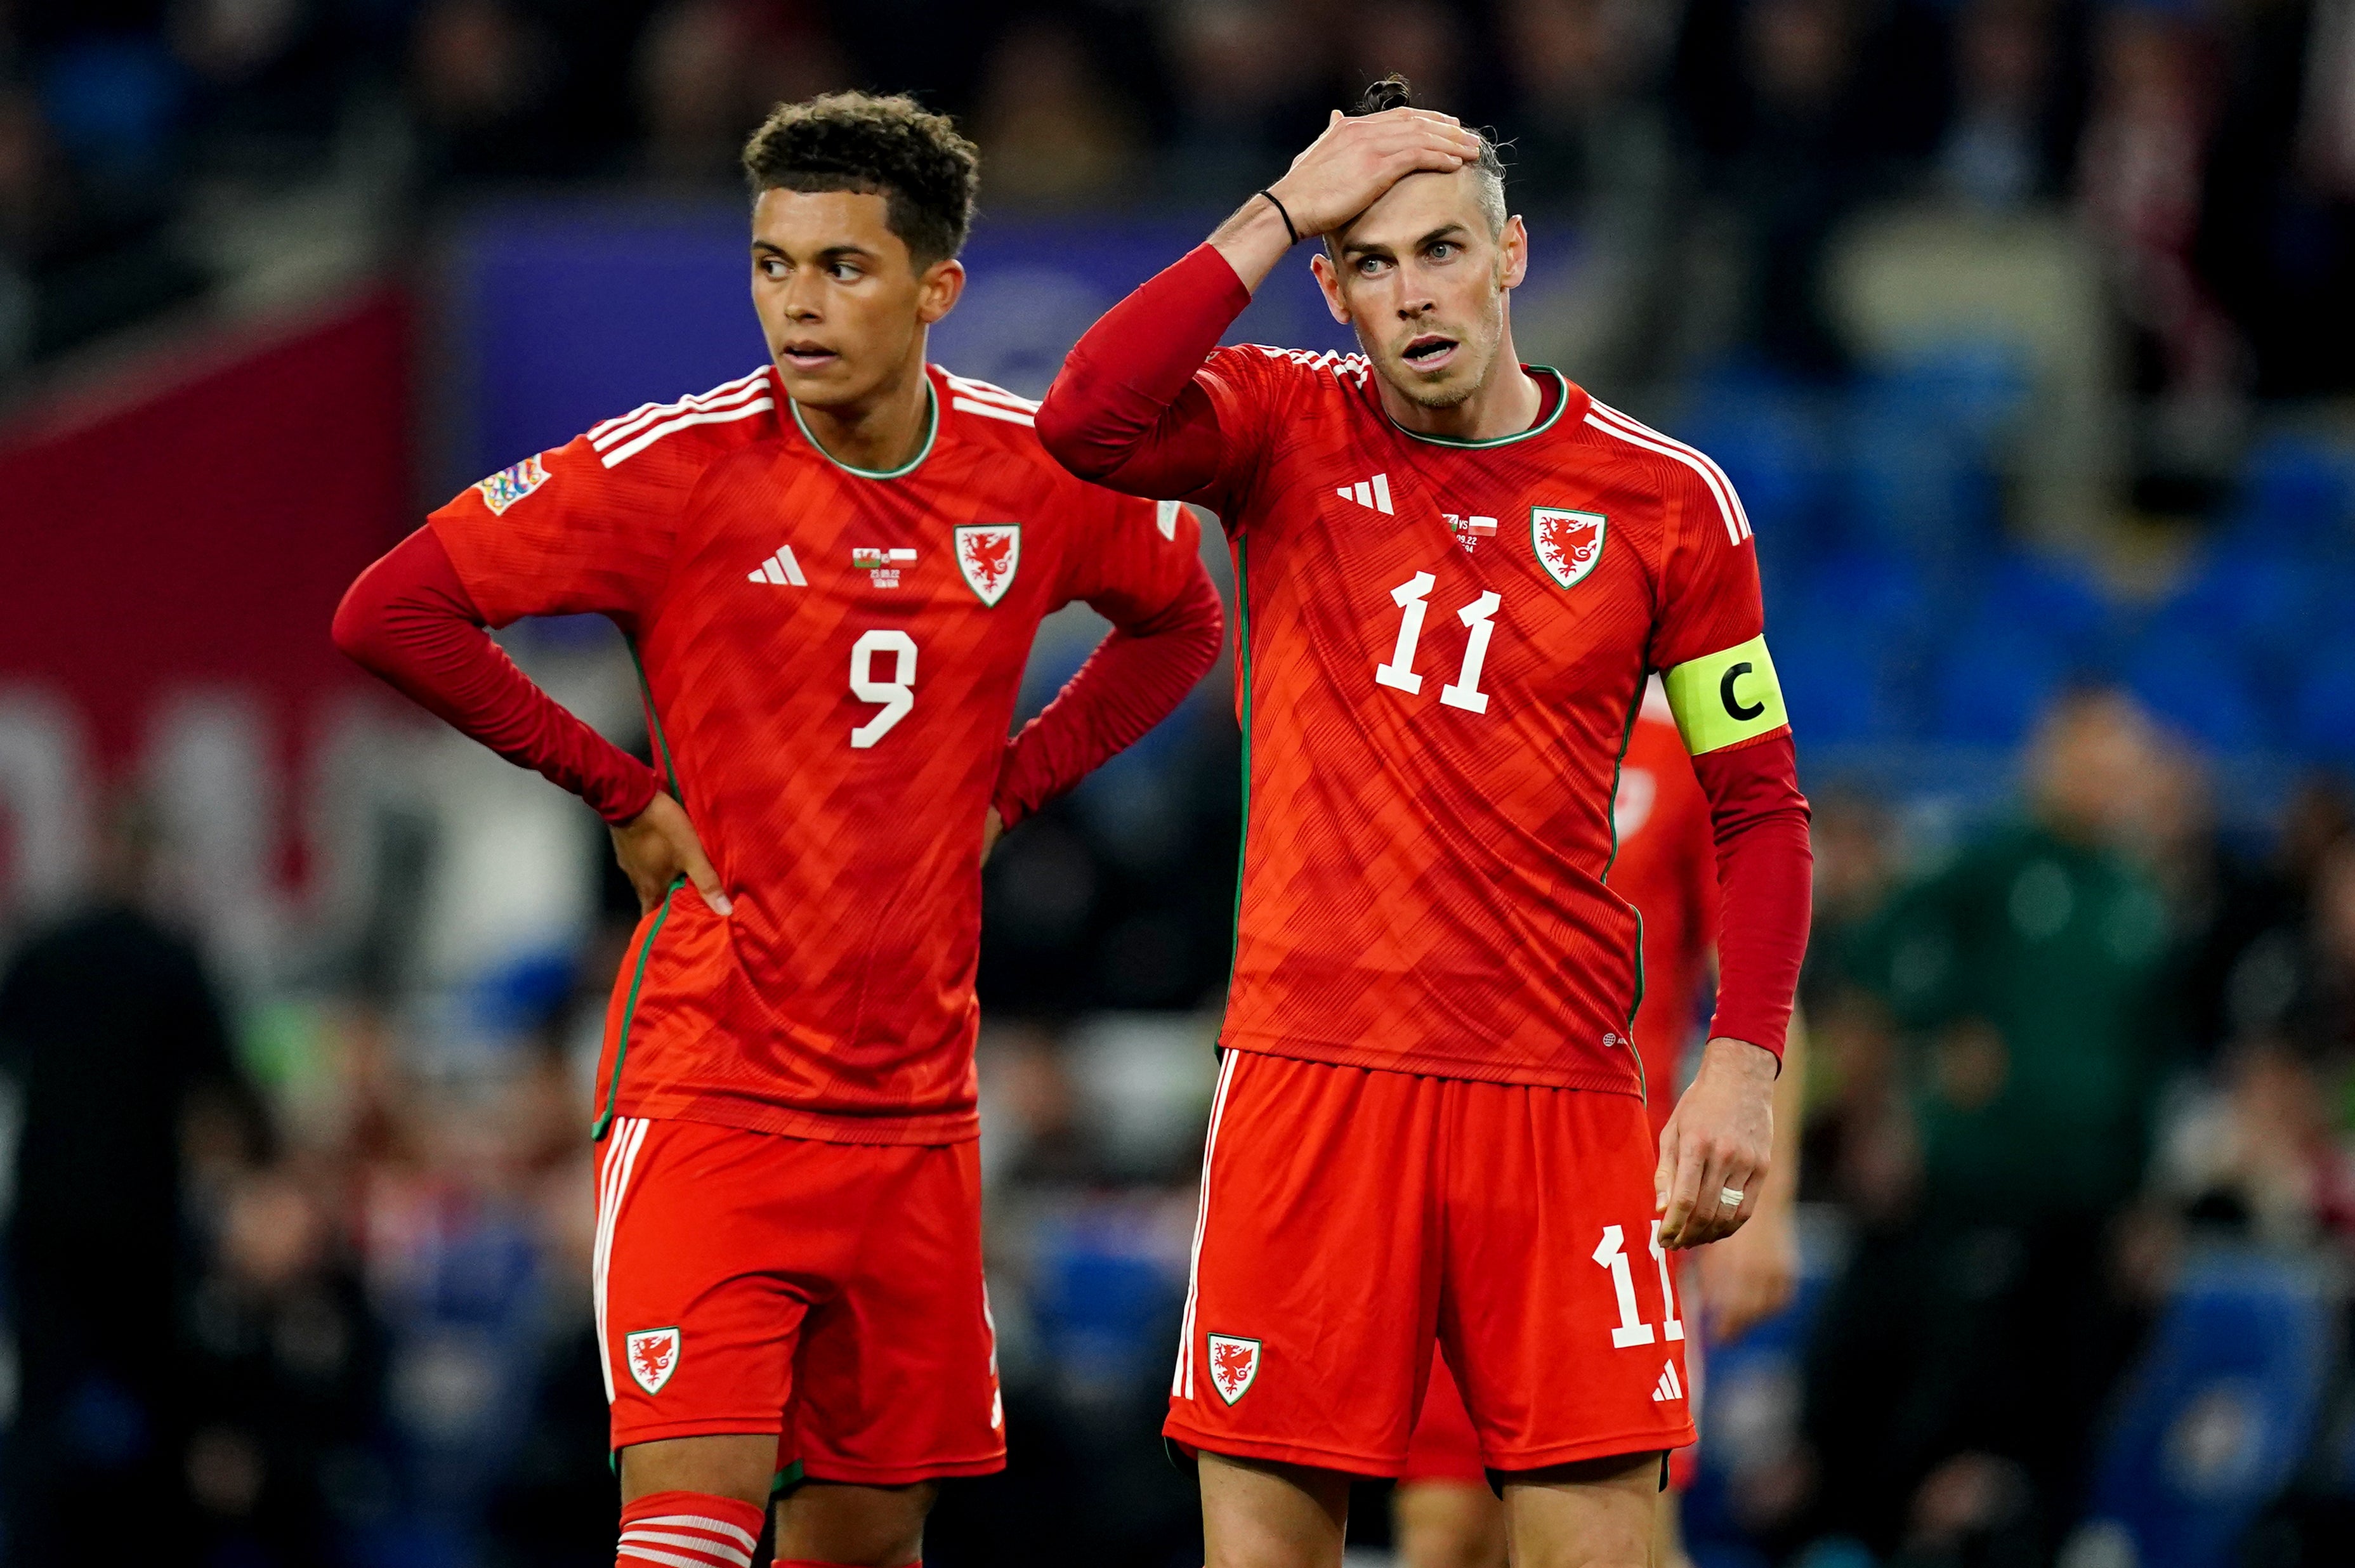 Wales were relegated from the top tier of the Nations League after defeat at home to Poland (Mike Egerton/PA)